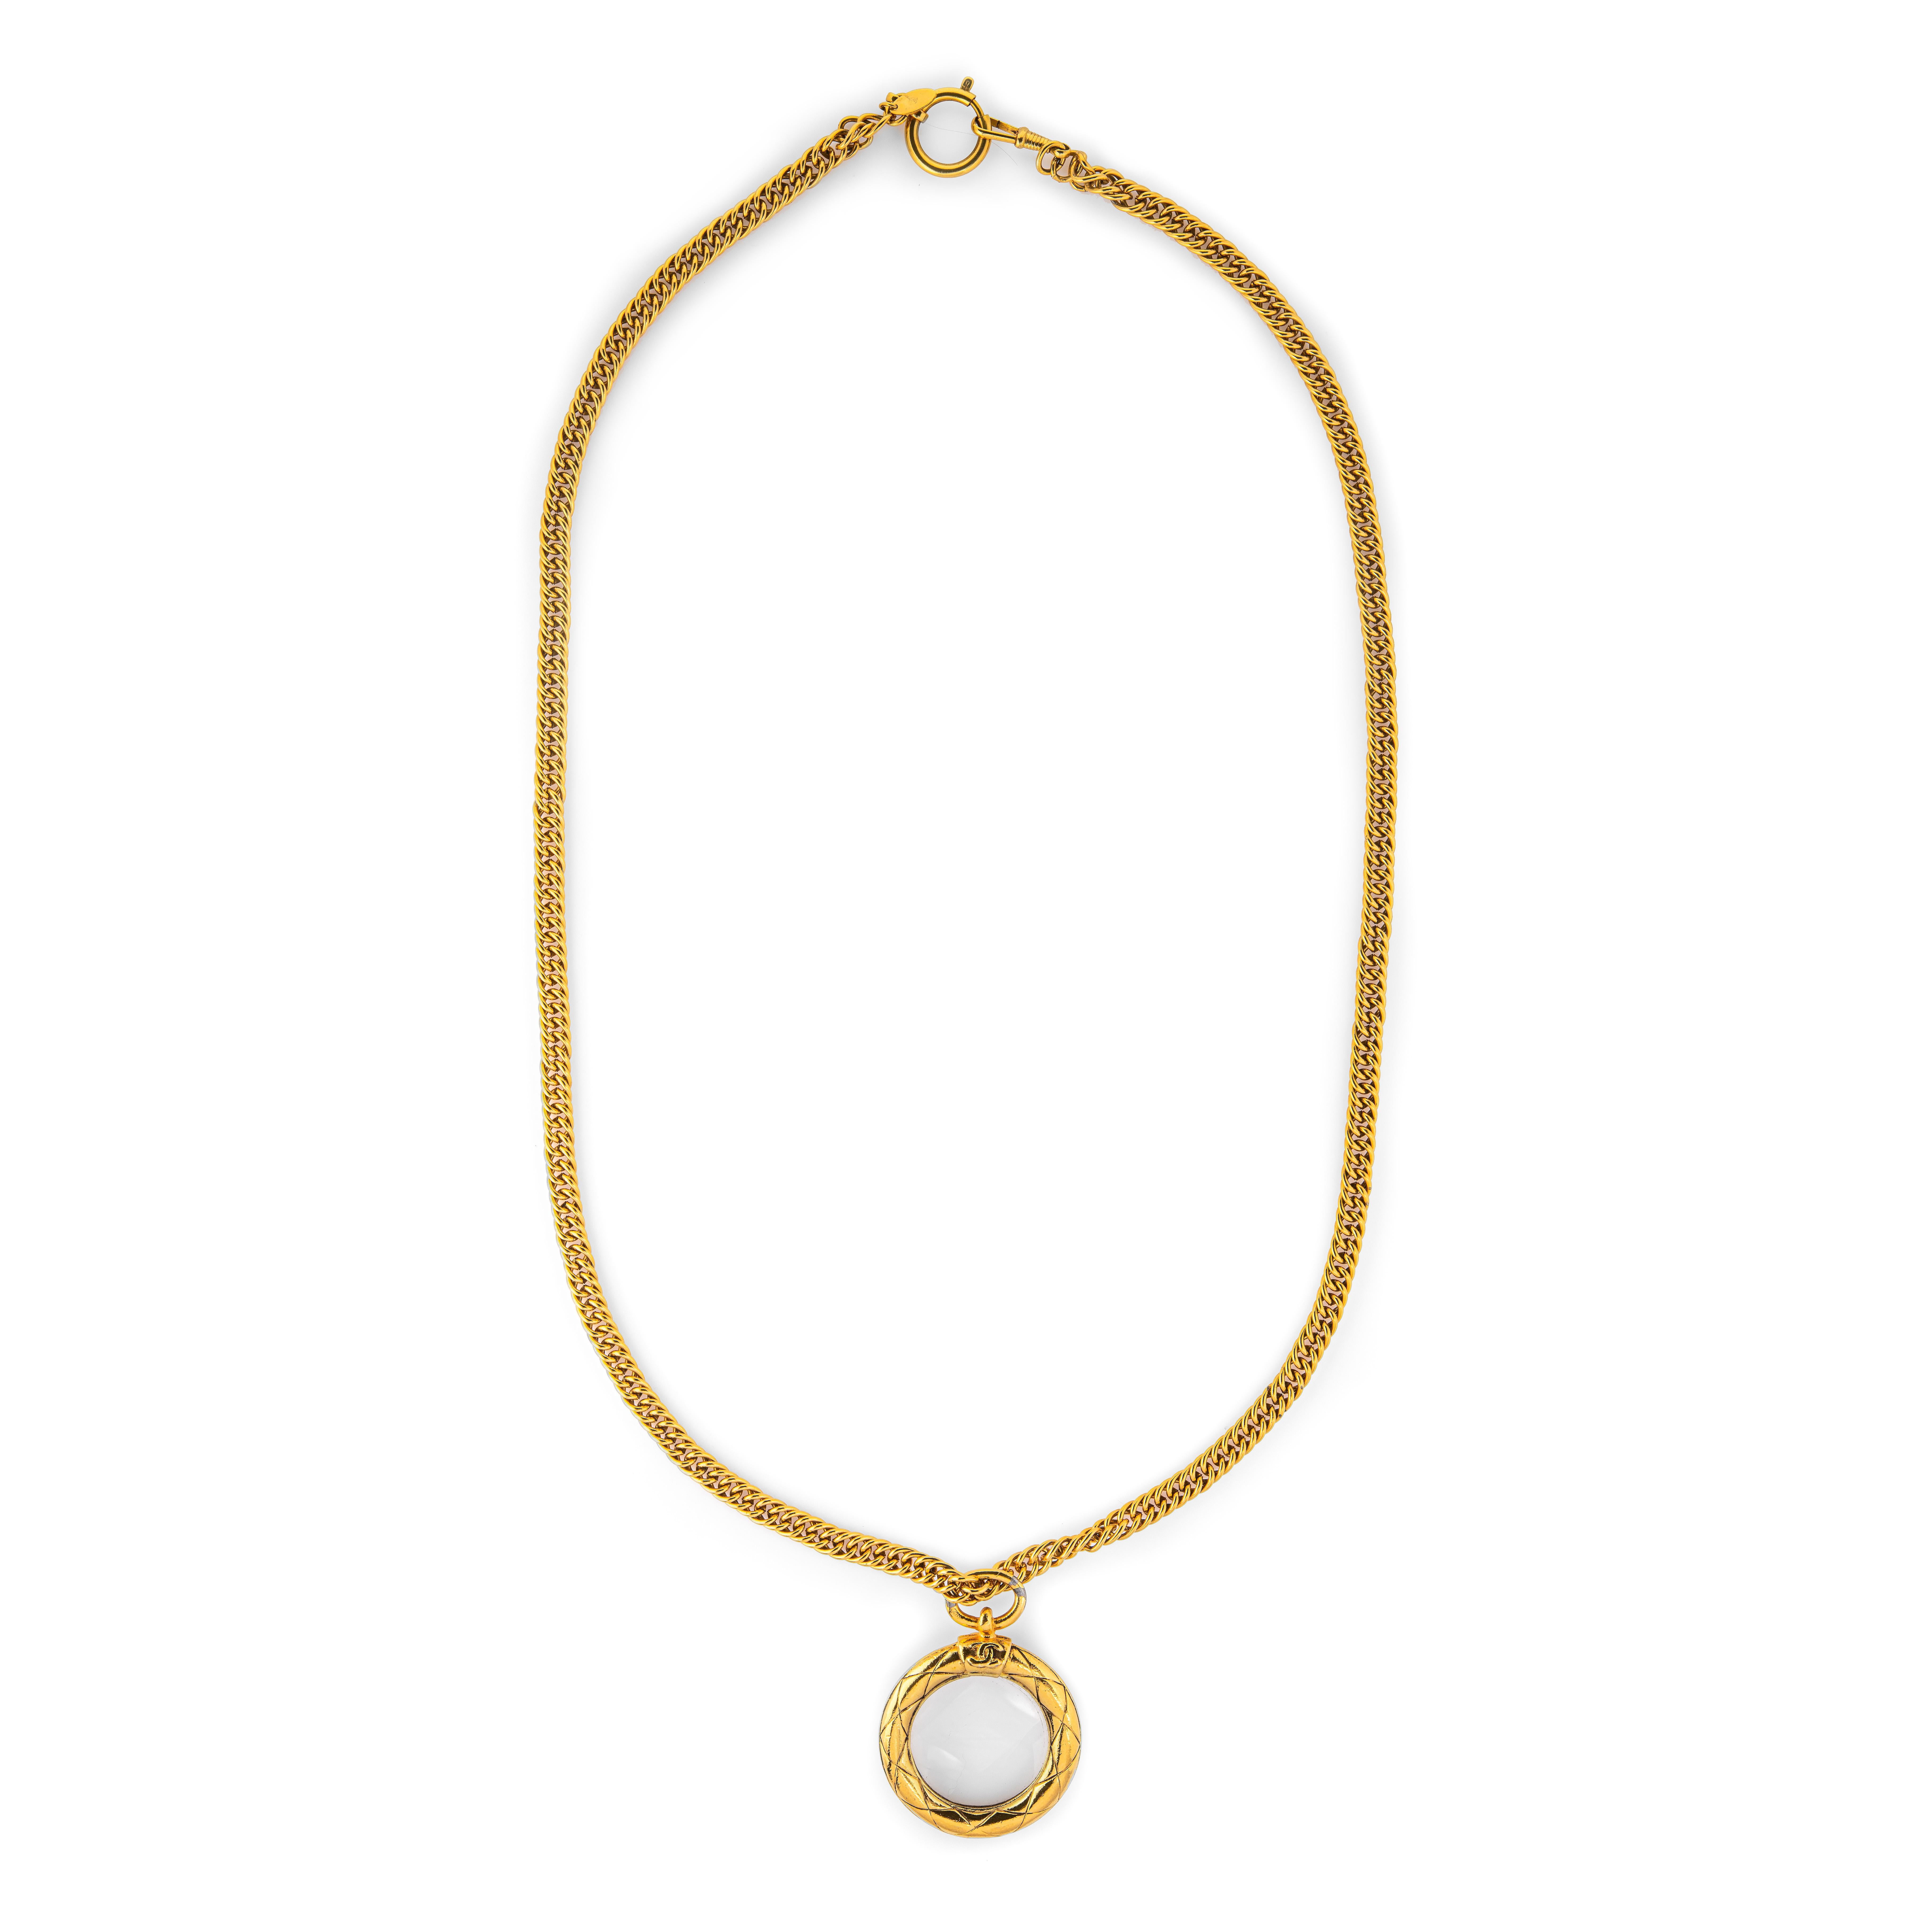 Vintage Chanel magnifying glass necklace crafted in yellow gold tone (circa 1980s). 

The long 36 inch curb link chain terminates to the quilted CC logo magnifying glass pendant. The substantial chain is 7.5mm wide (0.29 inches). 

The necklace is